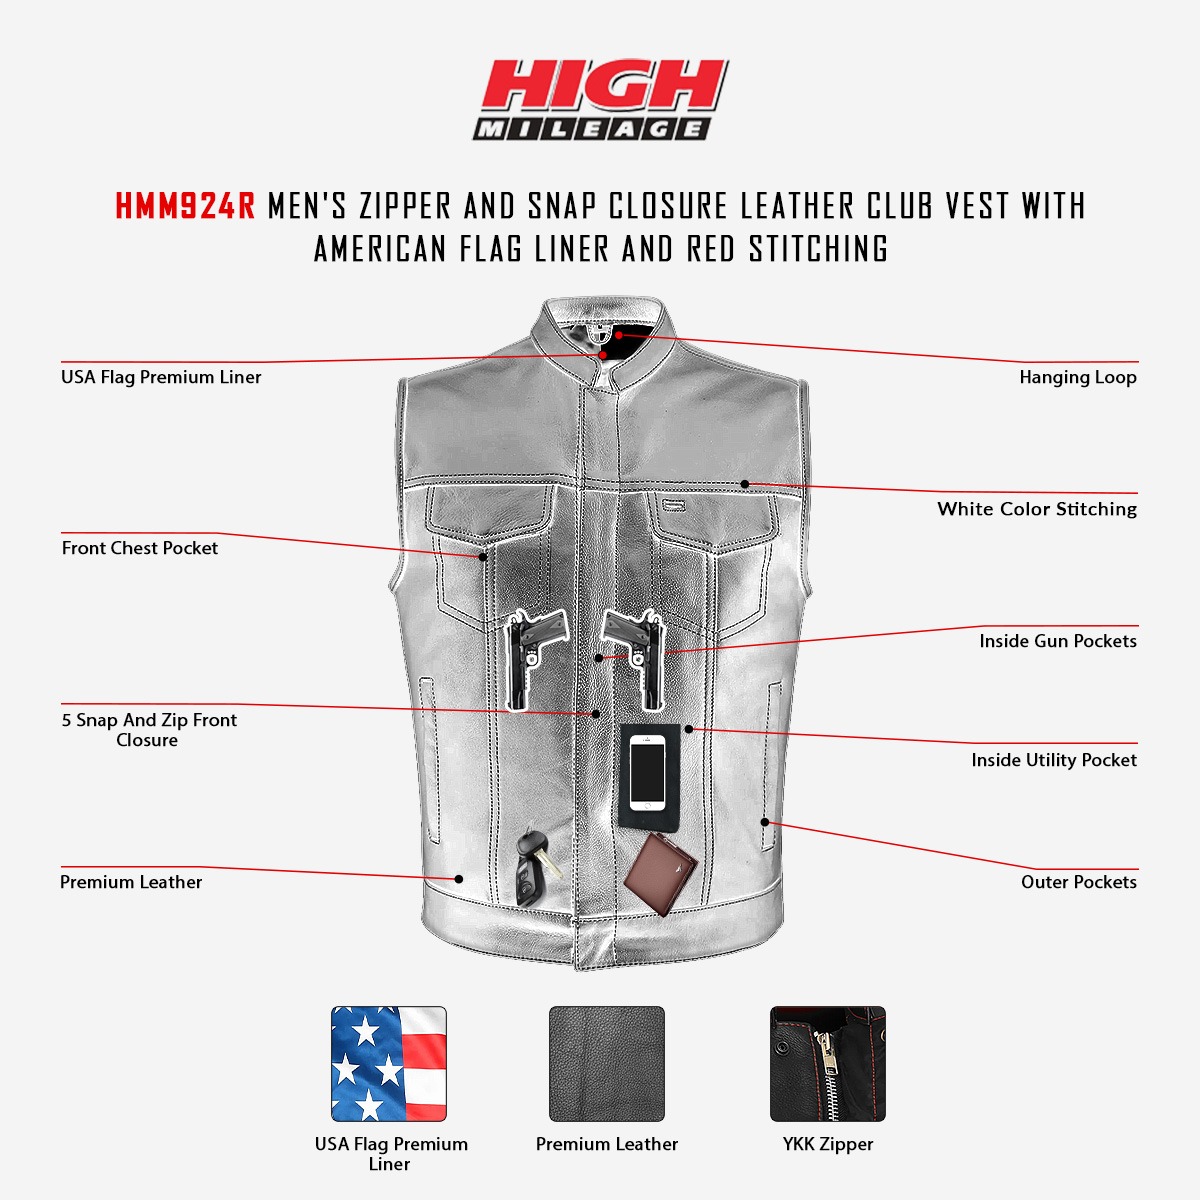  High Mileage HMM924R Men's Zipper and Snap Closure Collarless Leather Club Vest with American Flag Liner and Red Stitching -  Infographic 